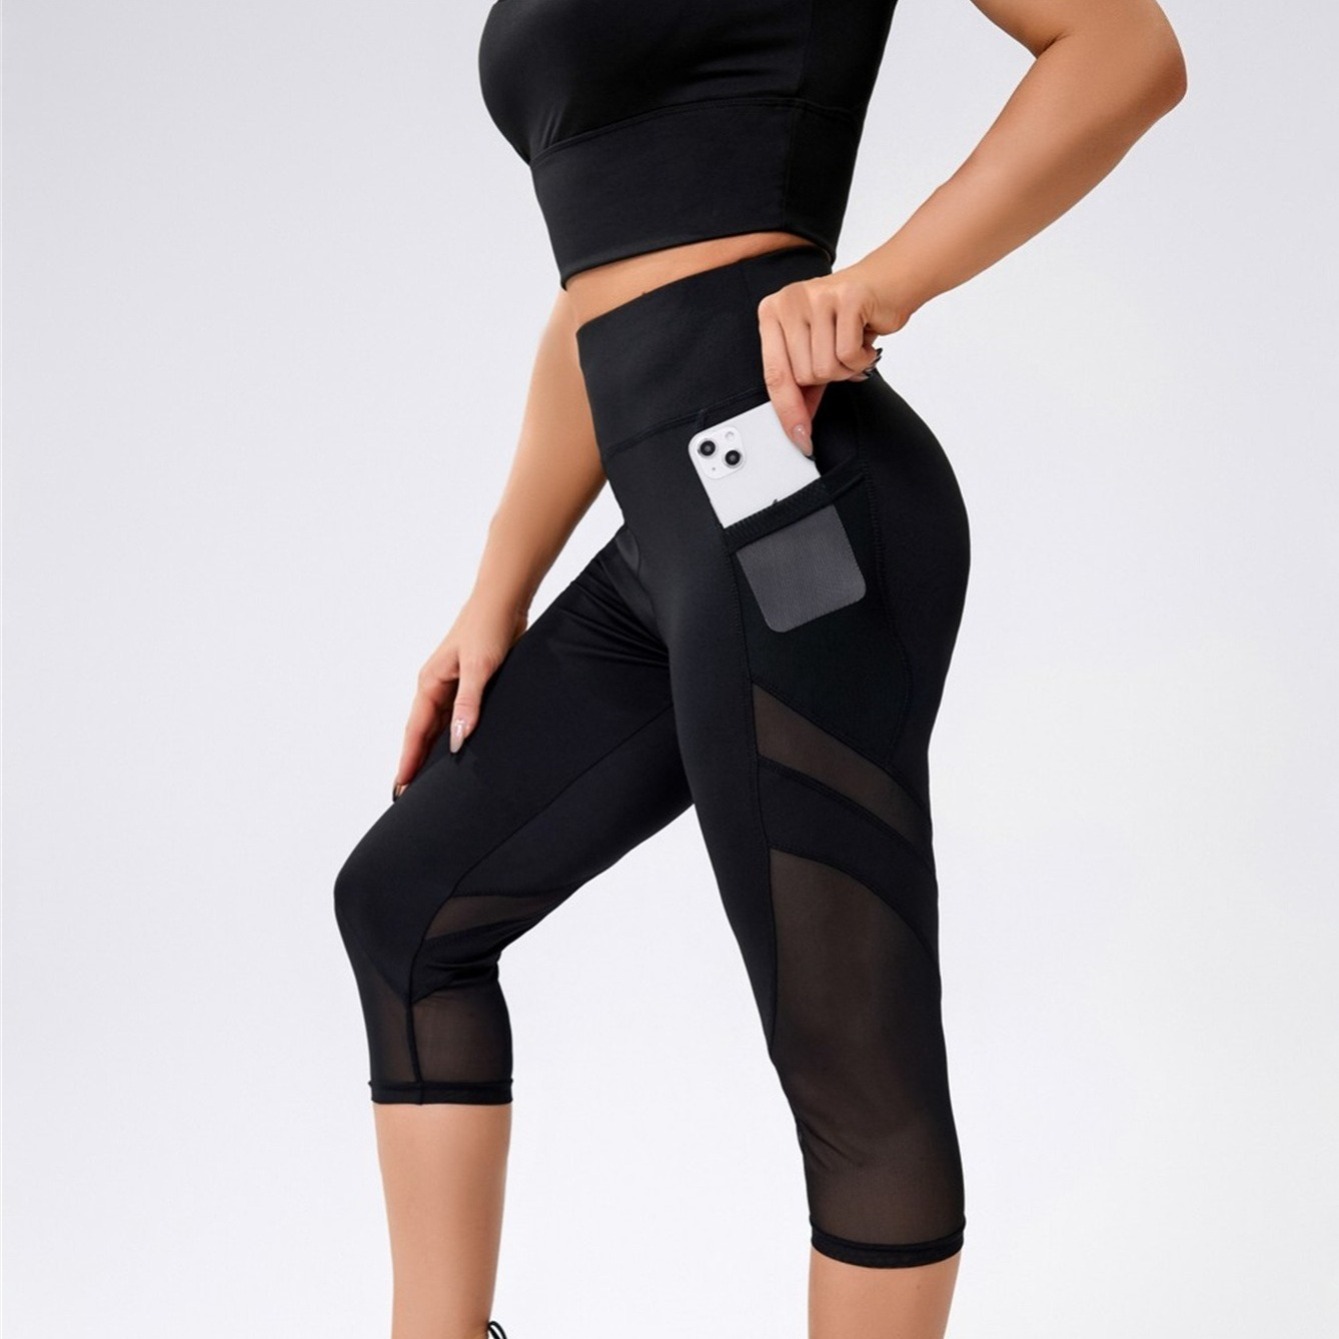 

Breathable Yoga Leggings With Phone Pocket And Soft Mesh Contrast - Women's Fitness Pants